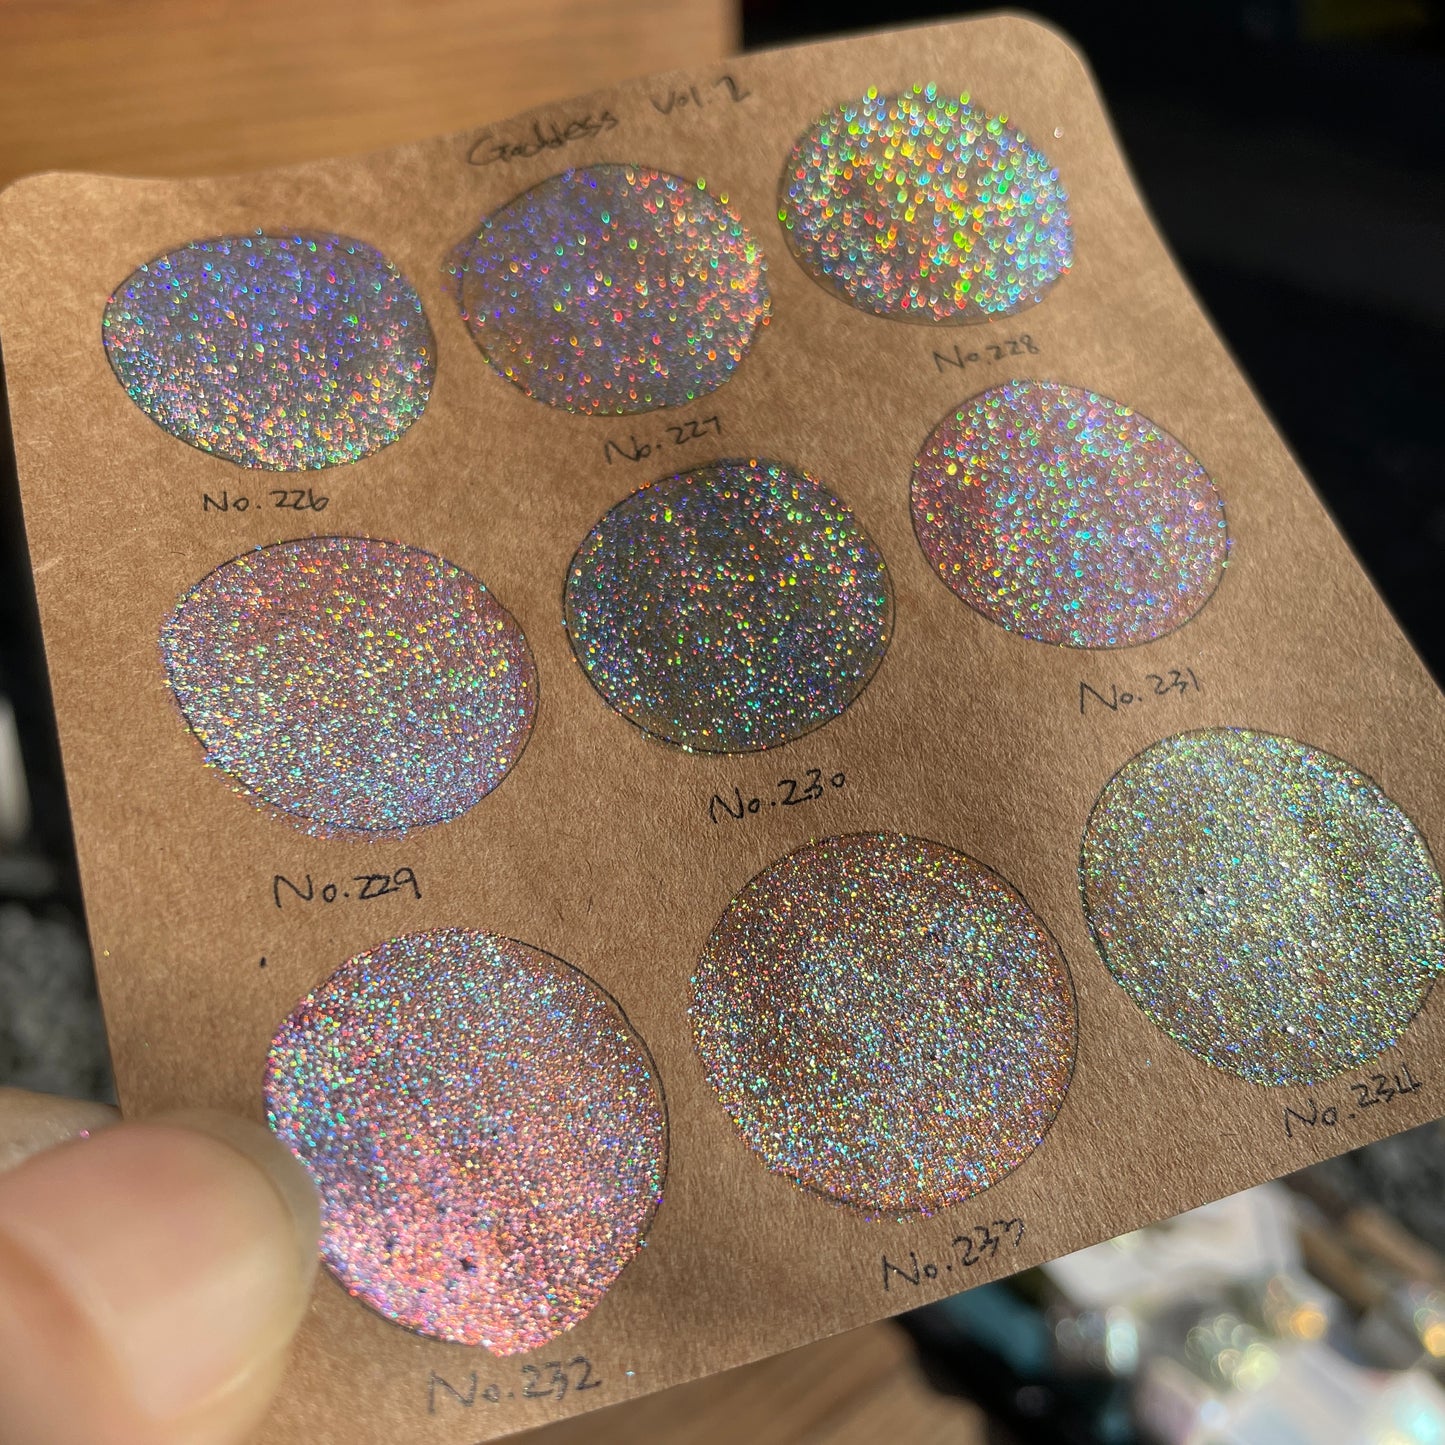 Limited Vol.2 Goddess Quarter Set Handmade Super Shift Aurora Shimmer Holographic Watercolor Paints by iuilewatercolors